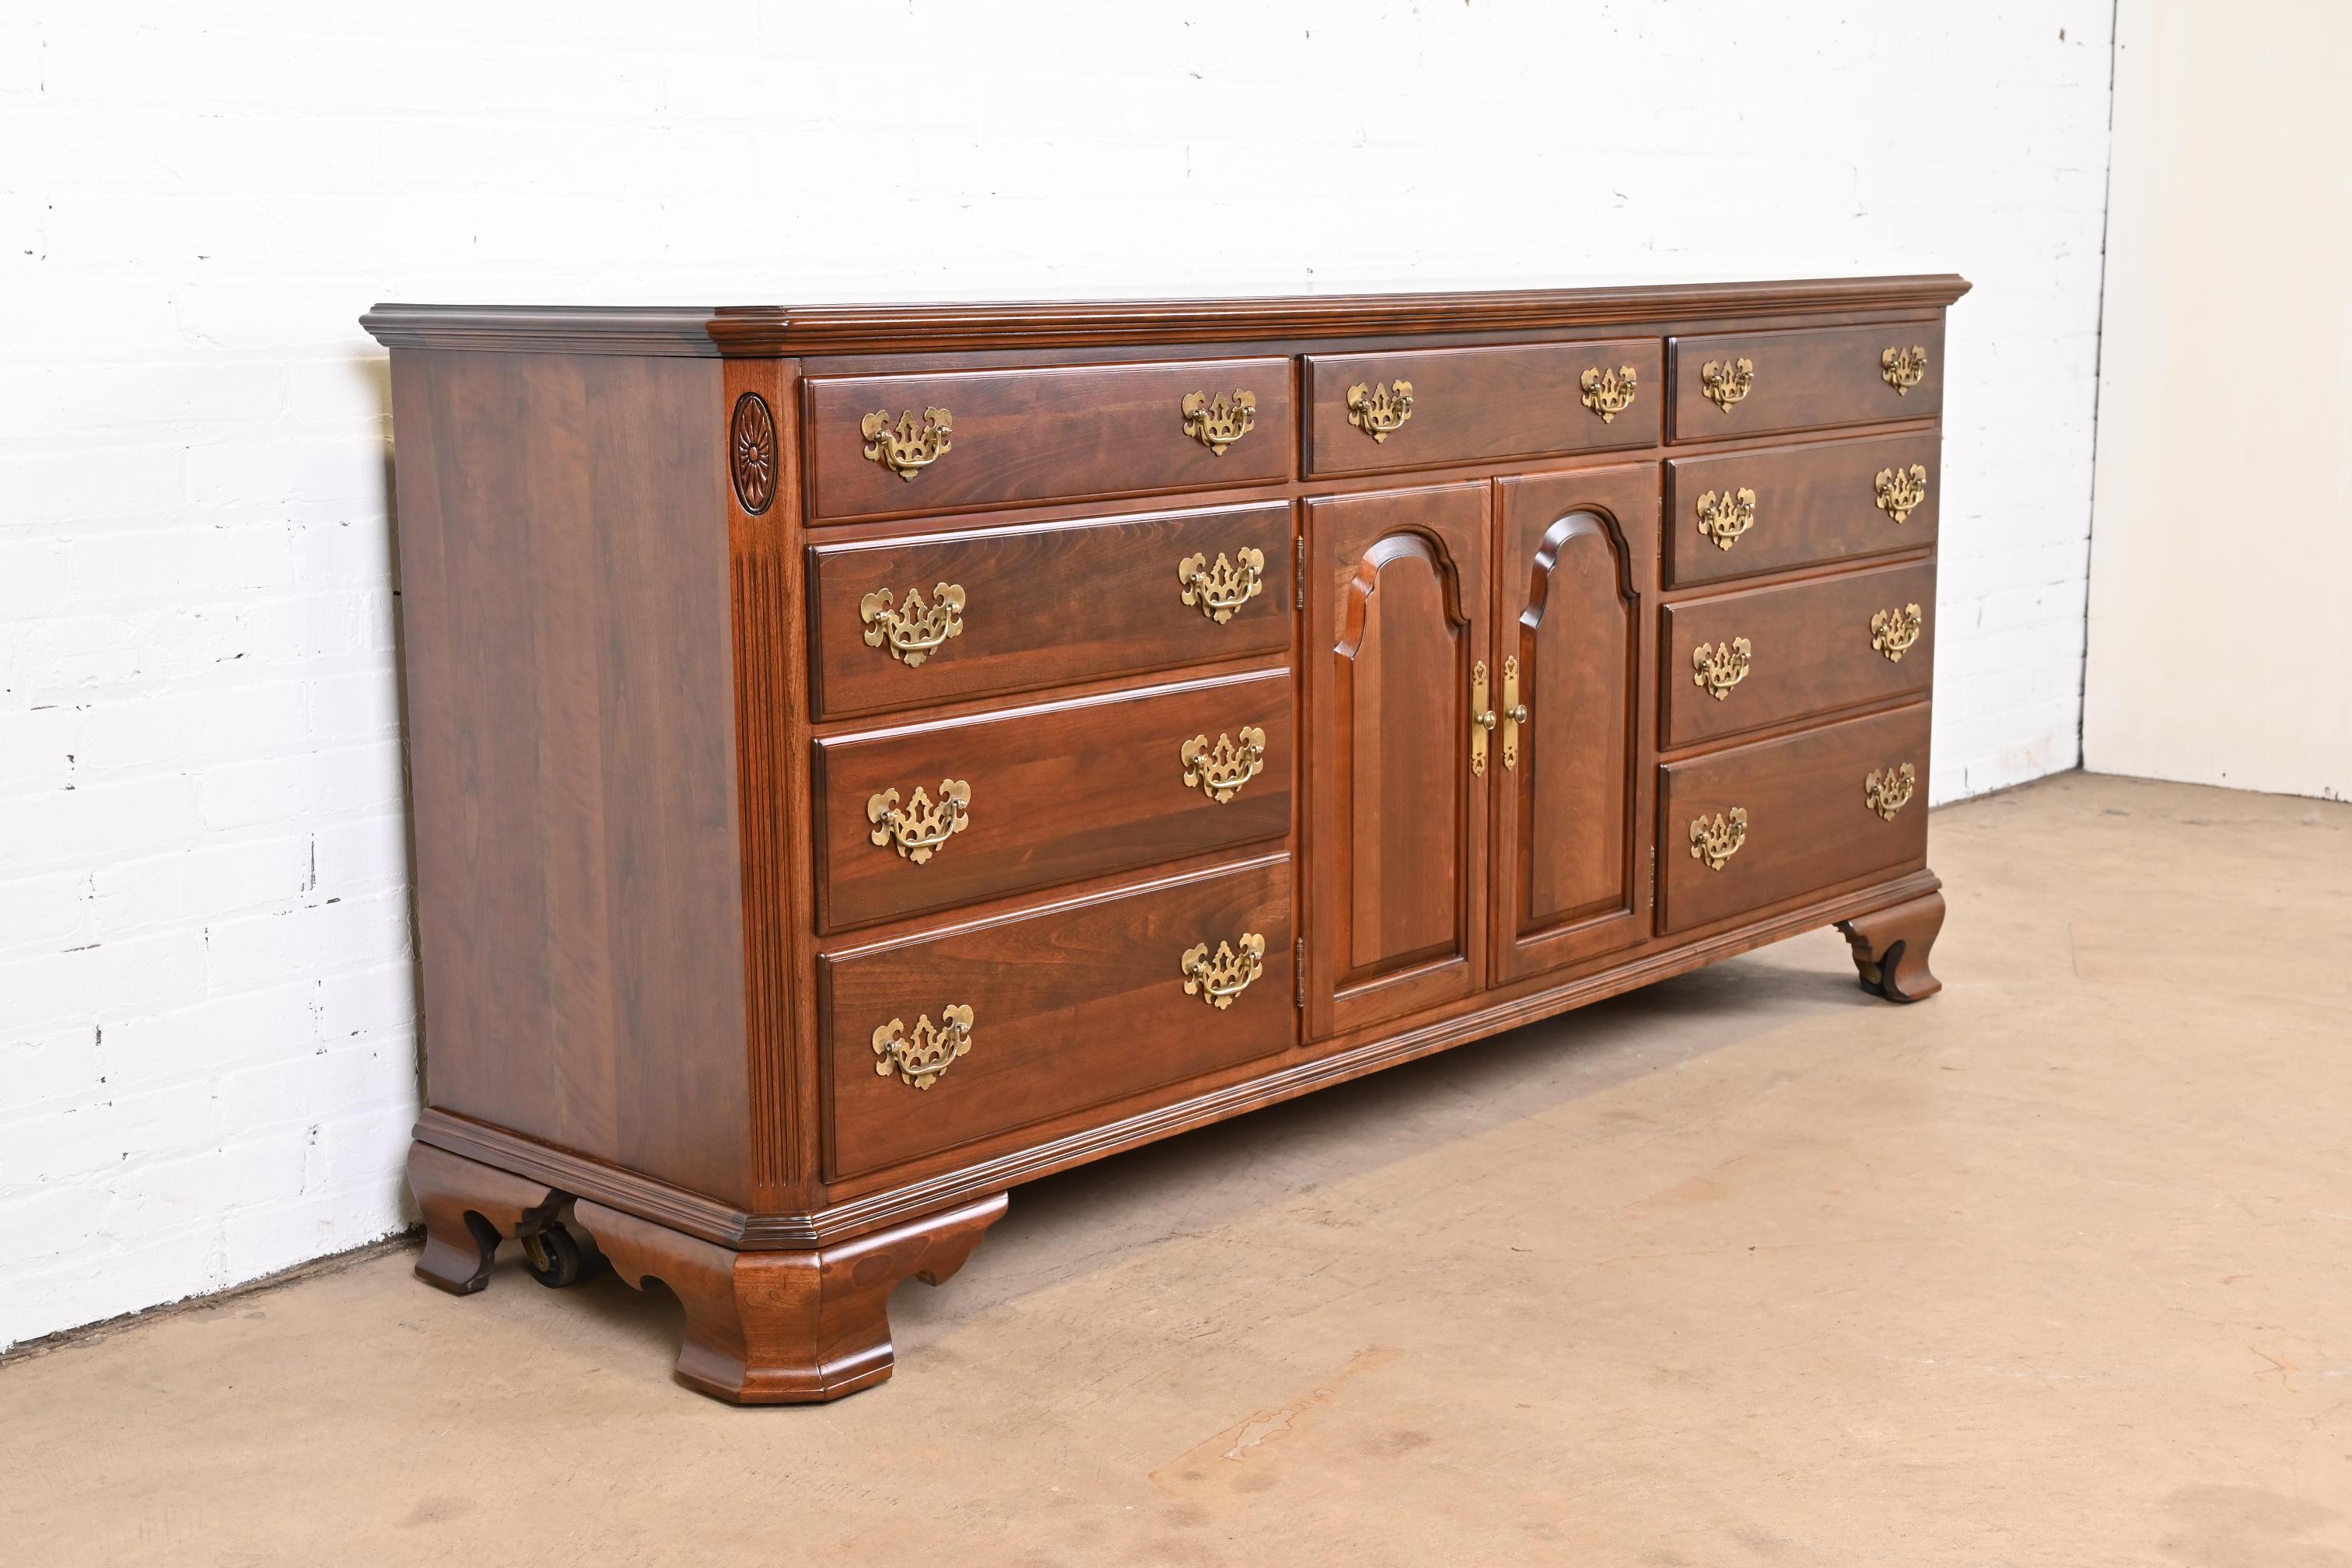 A gorgeous Georgian or Chippendale style eleven-drawer dresser or credenza

By Ethan Allen

USA, Circa 1980s

Carved solid cherry wood, with original brass hardware.

Measures: 74.5